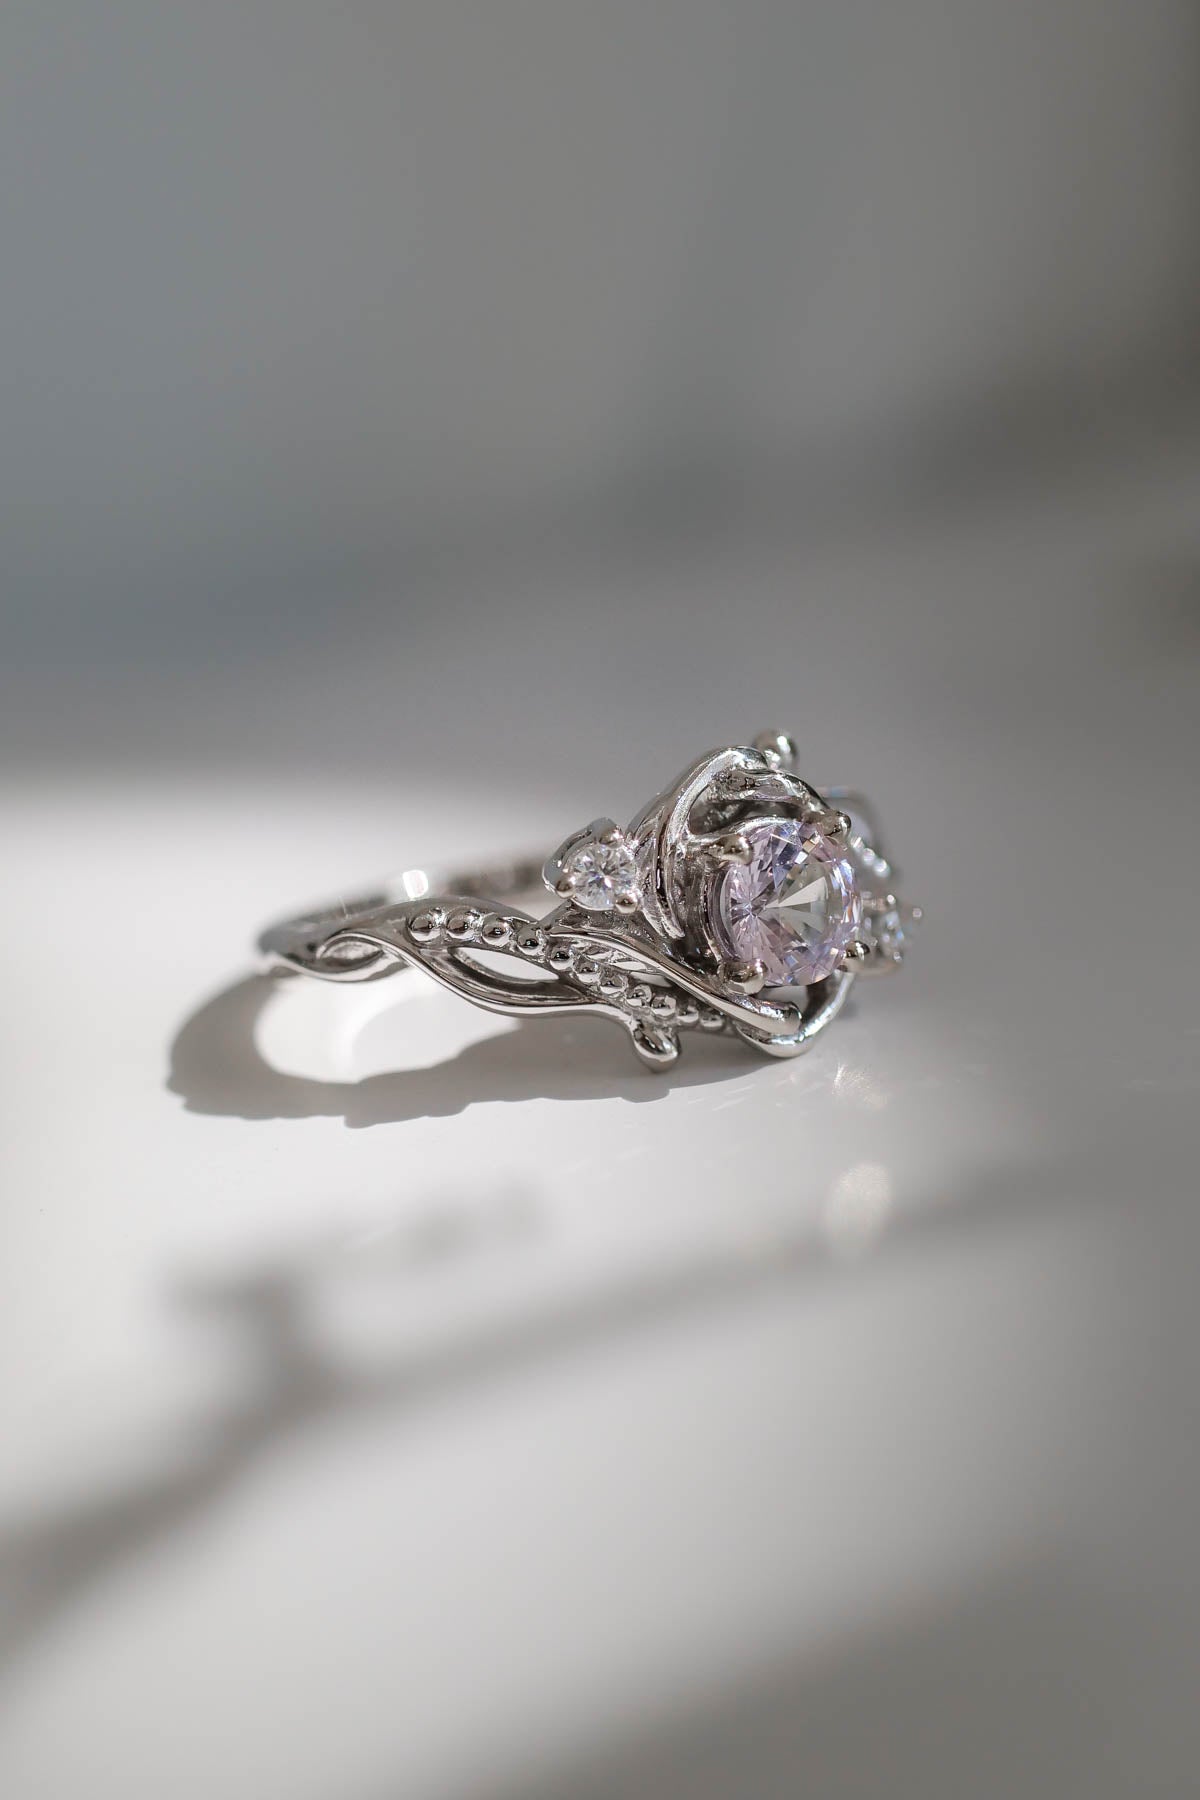 READY TO SHIP: Undina in 14K white gold, natural pink sapphire, 5 mm, moissanites, RING SIZE 7 US - Eden Garden Jewelry™